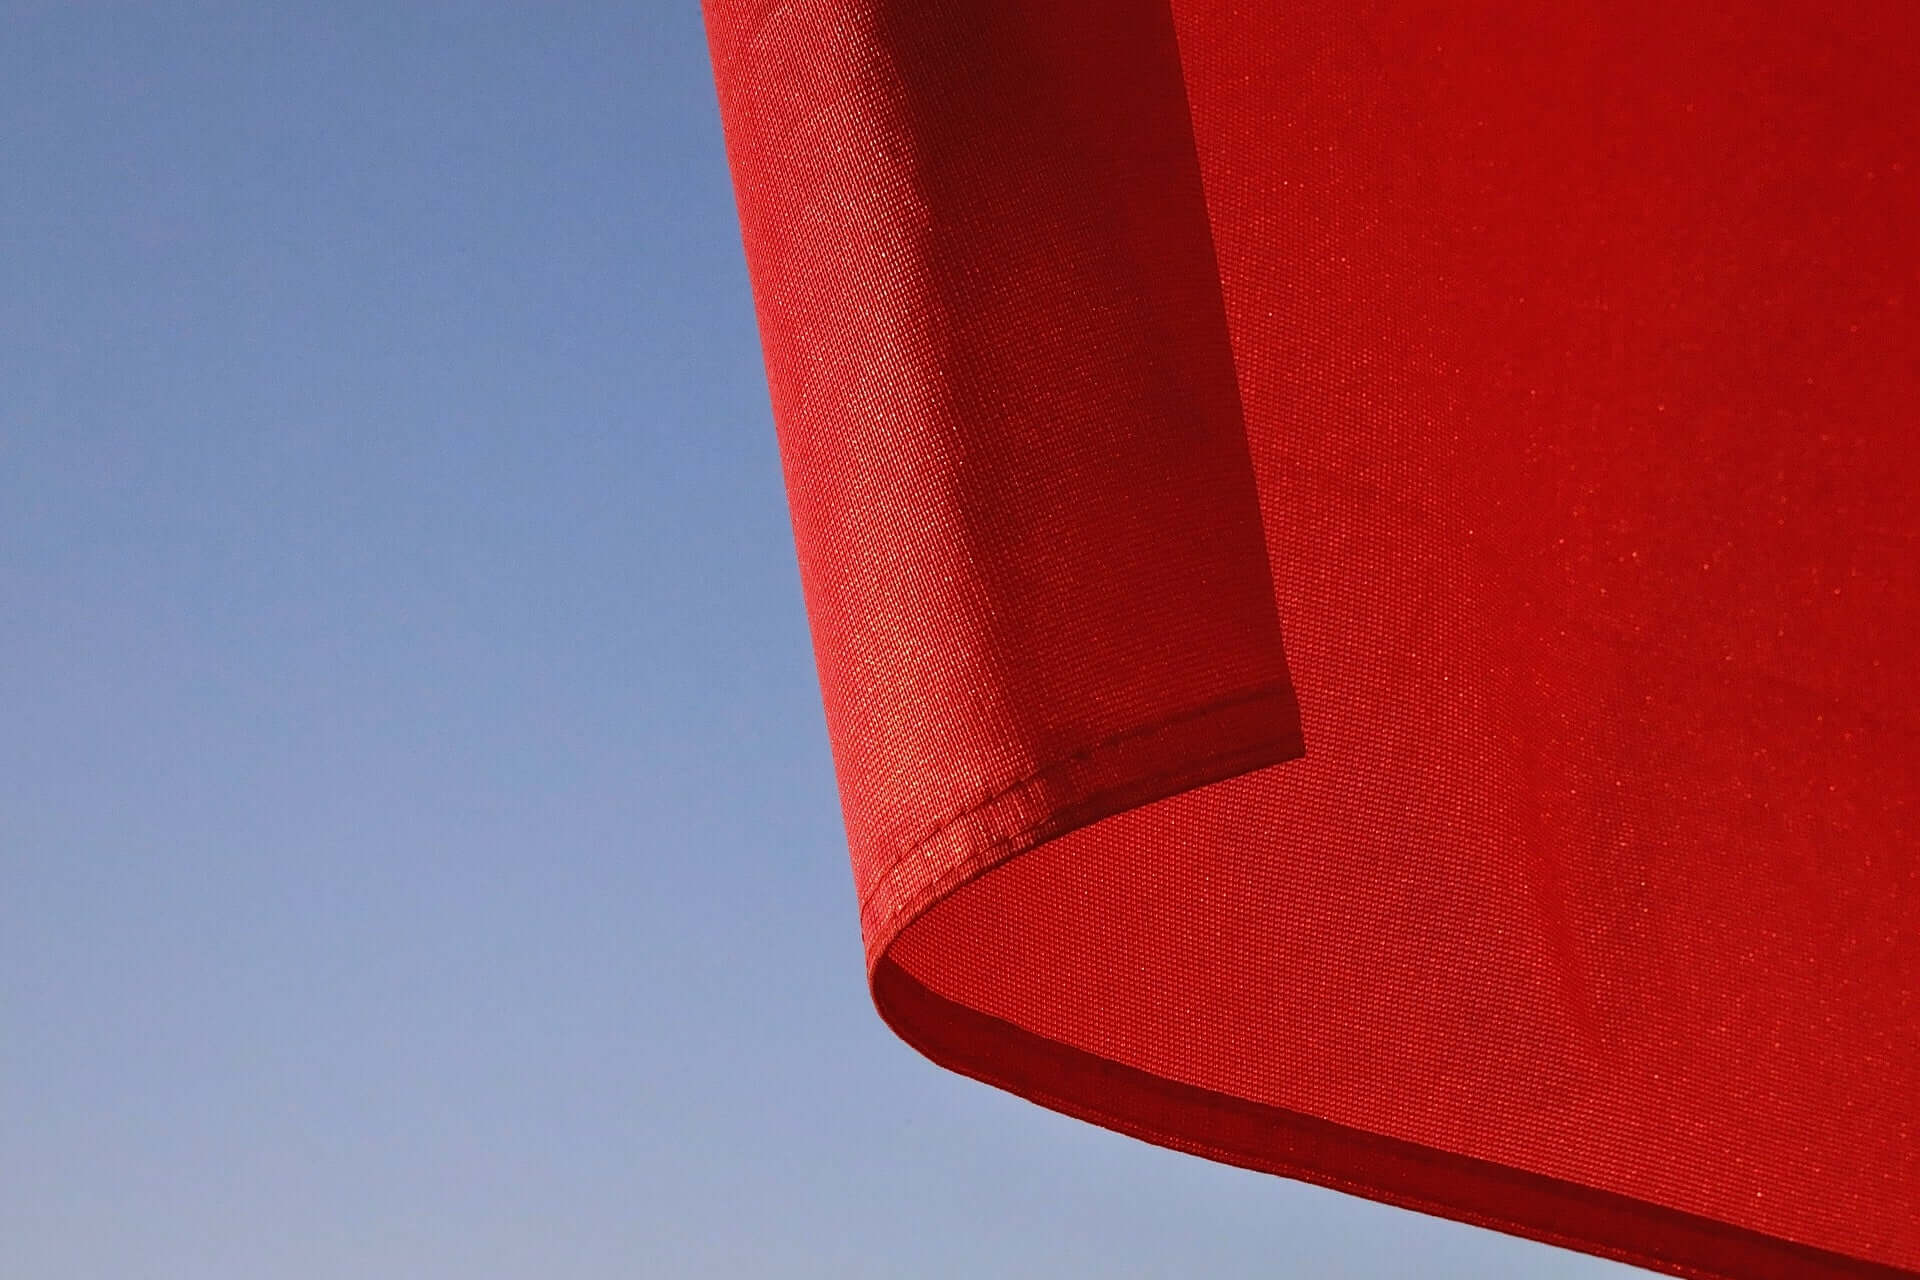 The corner of a red flag on a blue background.